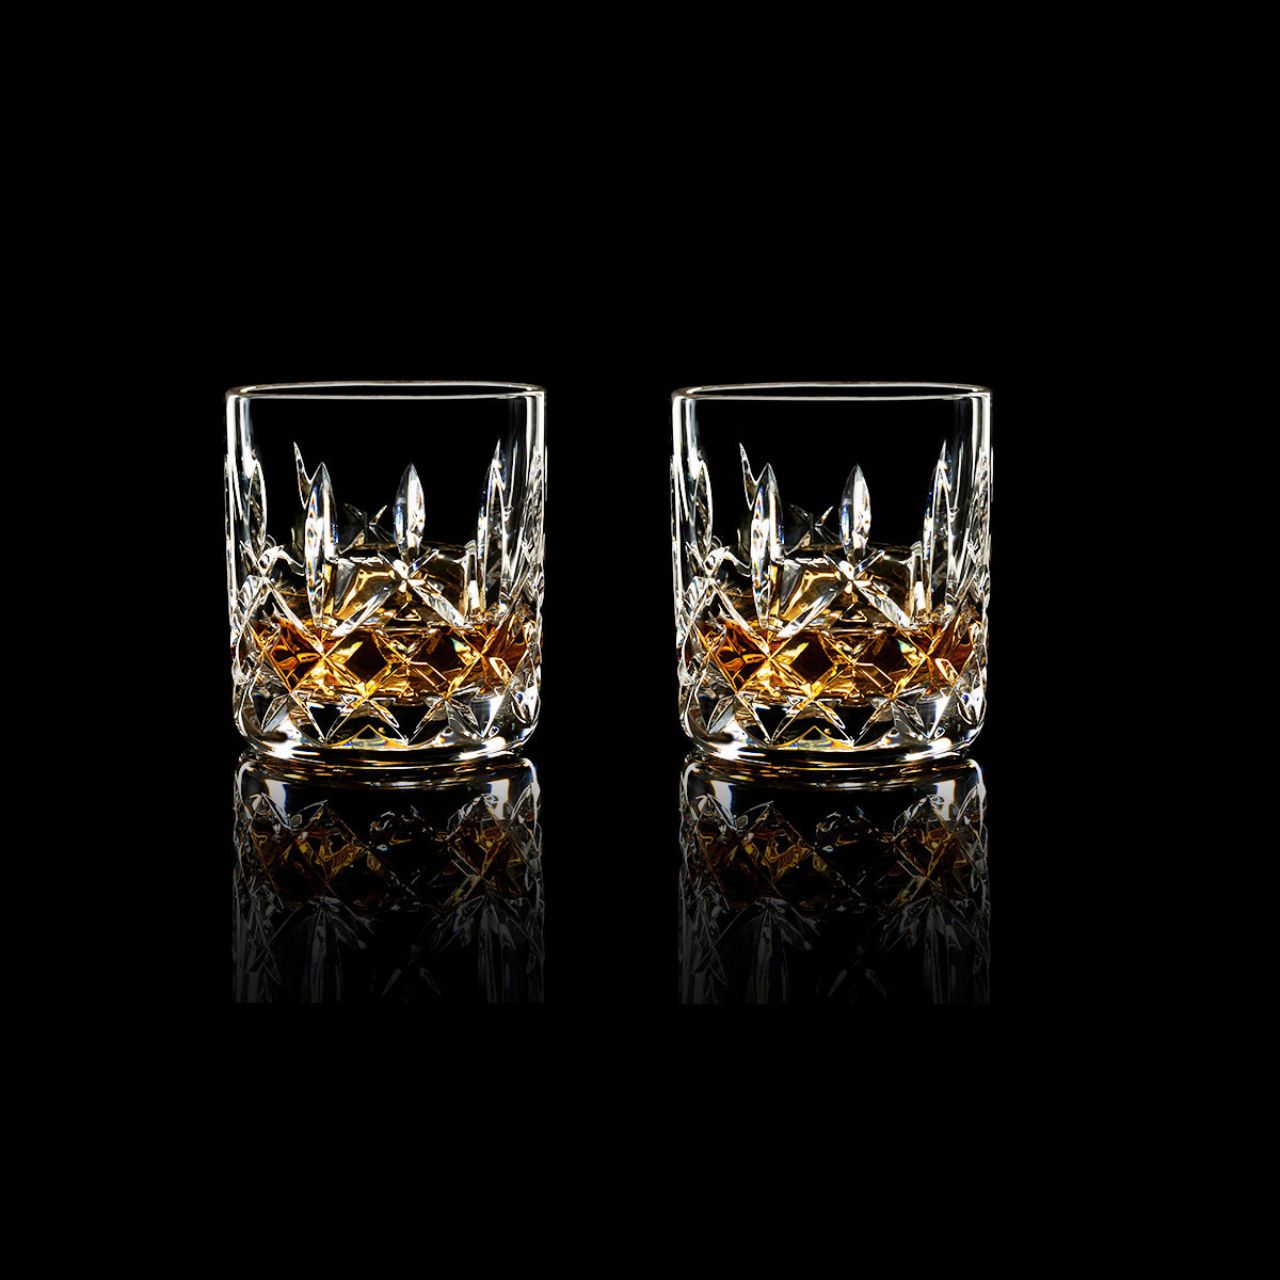 Waterford Crystal Lismore Connoisseur Straight Sided Tumbler Pair  The Waterford Lismore Connoisseur Whiskey Series respects and reveres whiskeys of all varieties with a flight of hand crafted crystal tasting glasses, each one individually shaped and designed for a specific whiskey to be enjoyed straight, neat, or on the rocks. How you choose to drink your whiskey will determine the best Lismore Connoisseur glass for your particular pour.